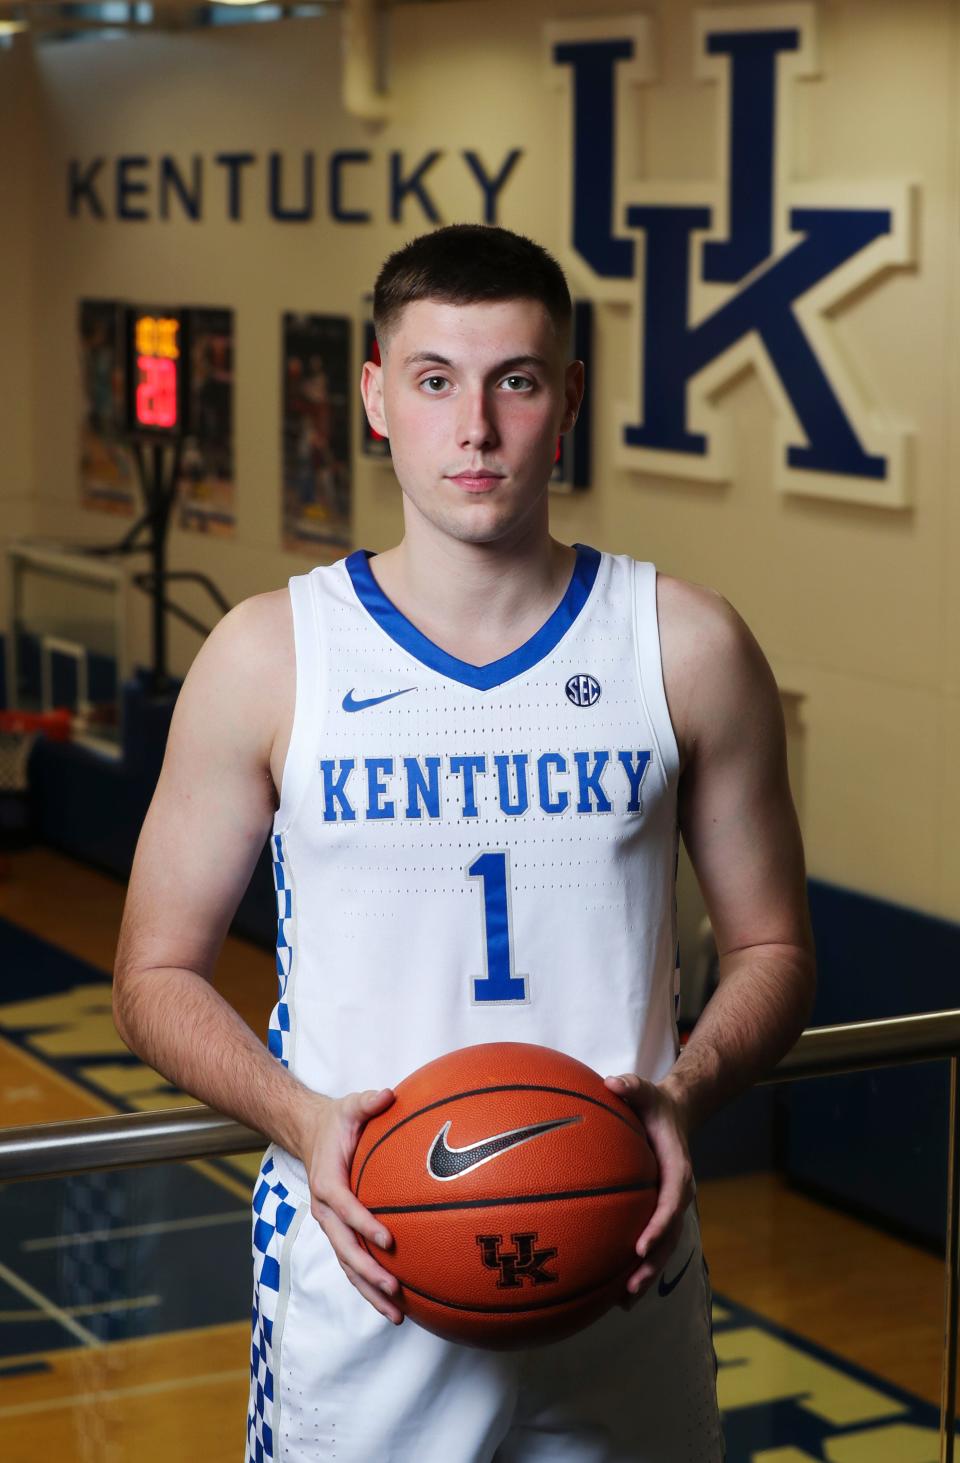 UK basketball player CJ Fredrick (1) is preparing for the upcoming season.  He was at the Joe Craft Center practice facility in Lexington, Ky. on Sep. 22, 2021.  